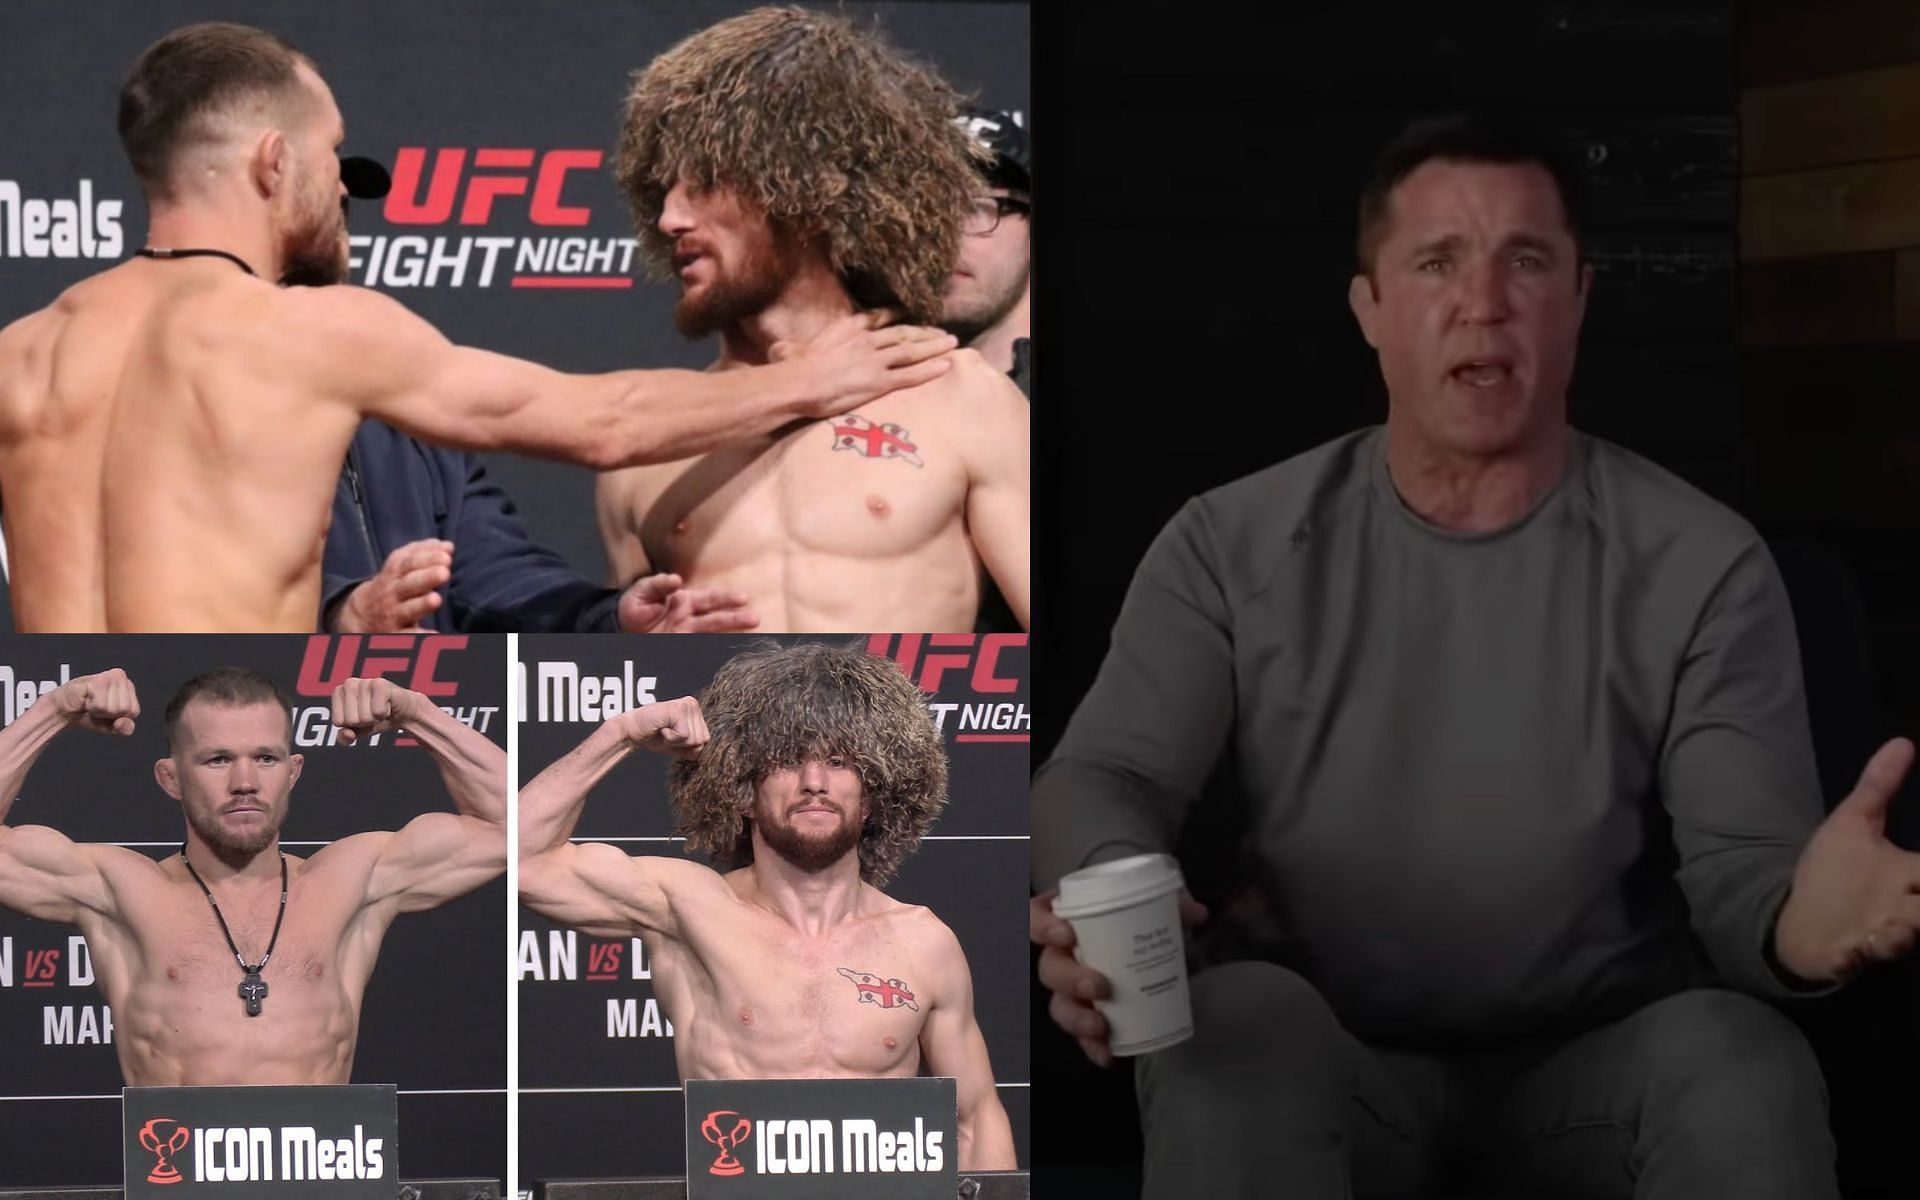 Petr Yan vs Merab Dvalishvili (left) and Chael Sonnen (right). [Images courtesy: left images from YouTube MMAWeekly.com and Bloody Elbow, and right image from YouTube Chael Sonnen]